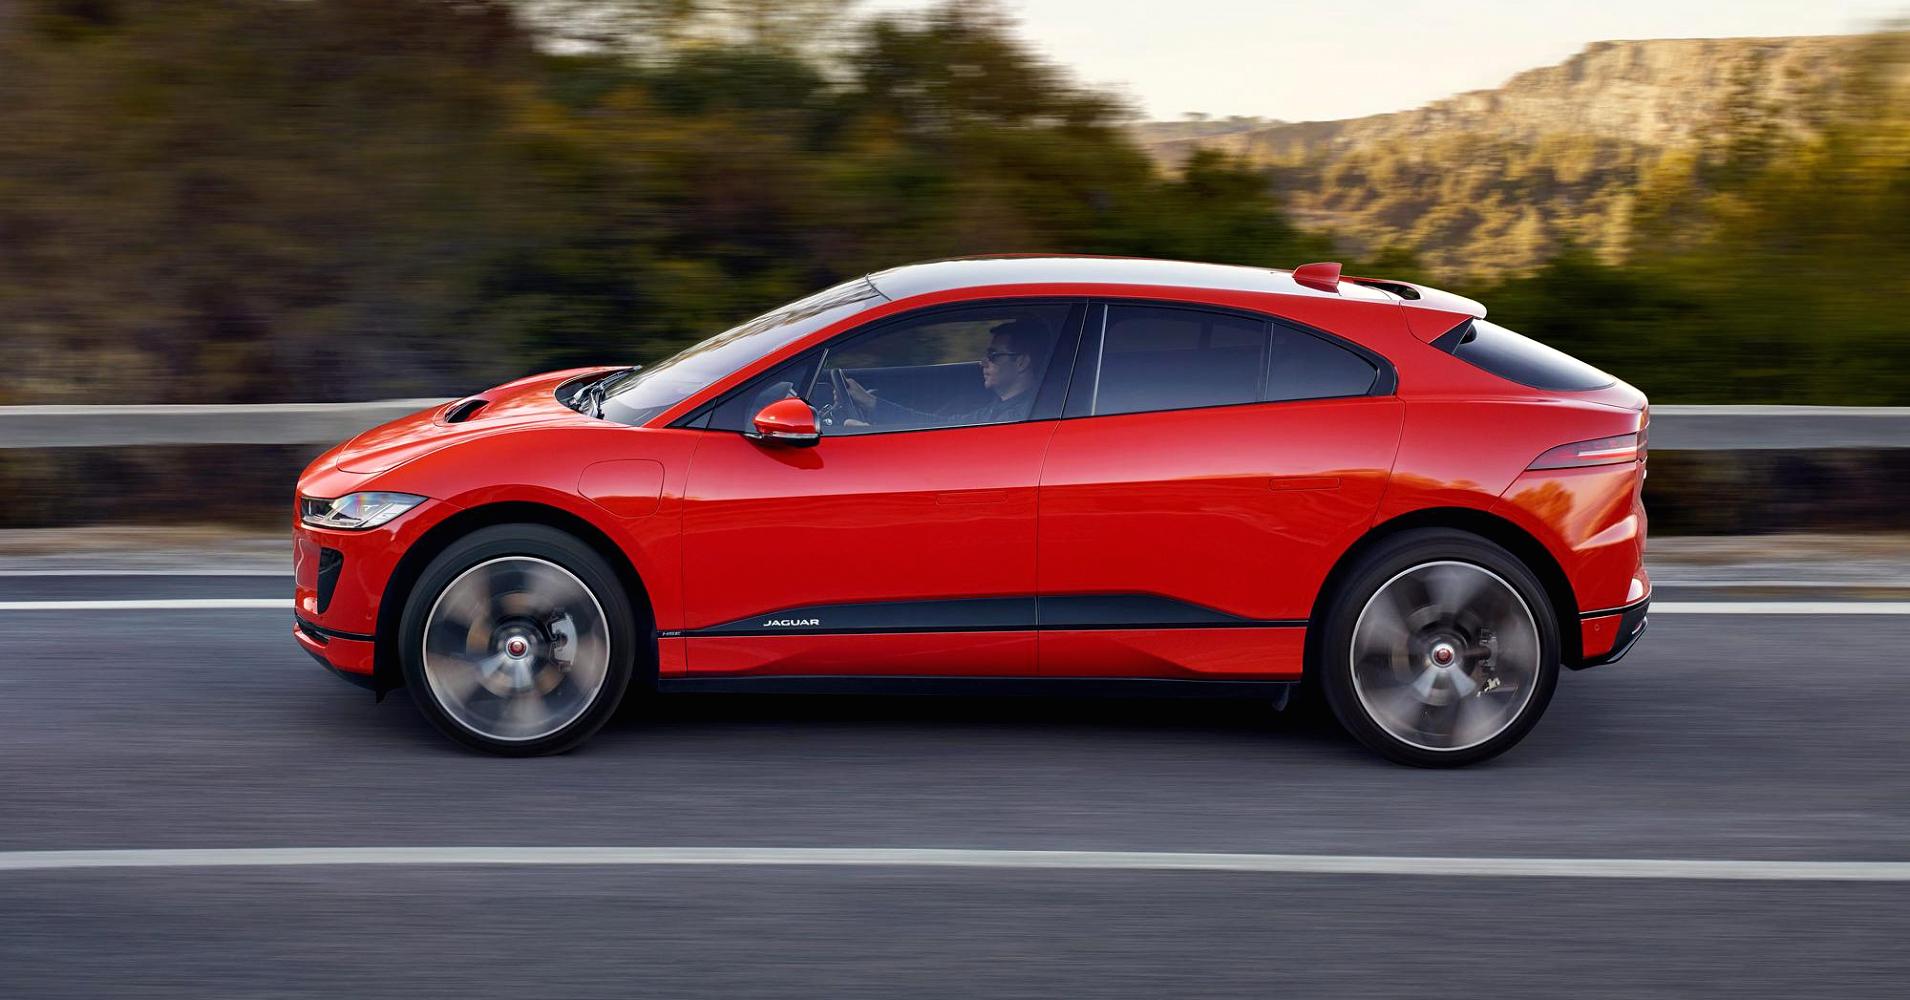 Watch Jaguar unveil its first all-electric vehicle, designed to take on Tesla Model X ...